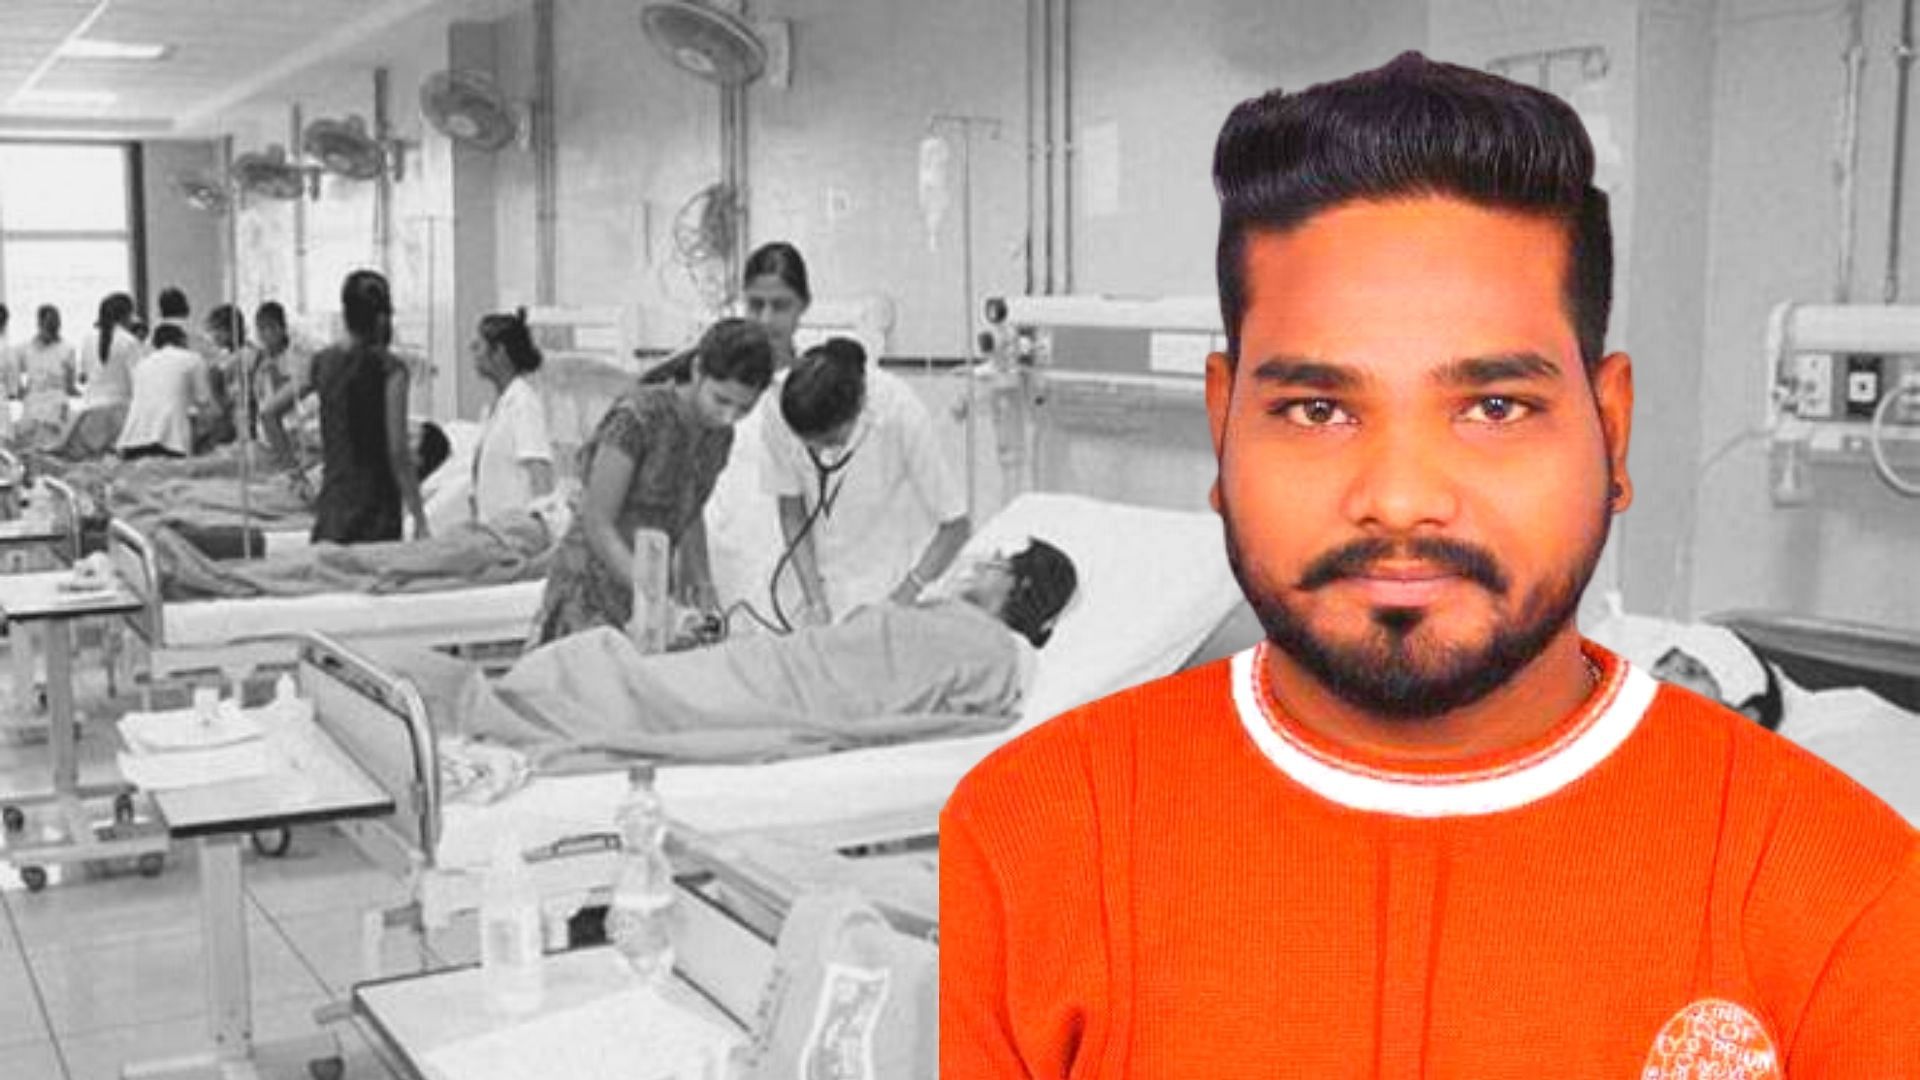 24-year-old Sunil Kashyap, who sells fruit juice for a living in Punjab’s Fazilka town, has appealed to the authorities to help participate in trials that would lead to finding a cure for COVID-19.&nbsp;